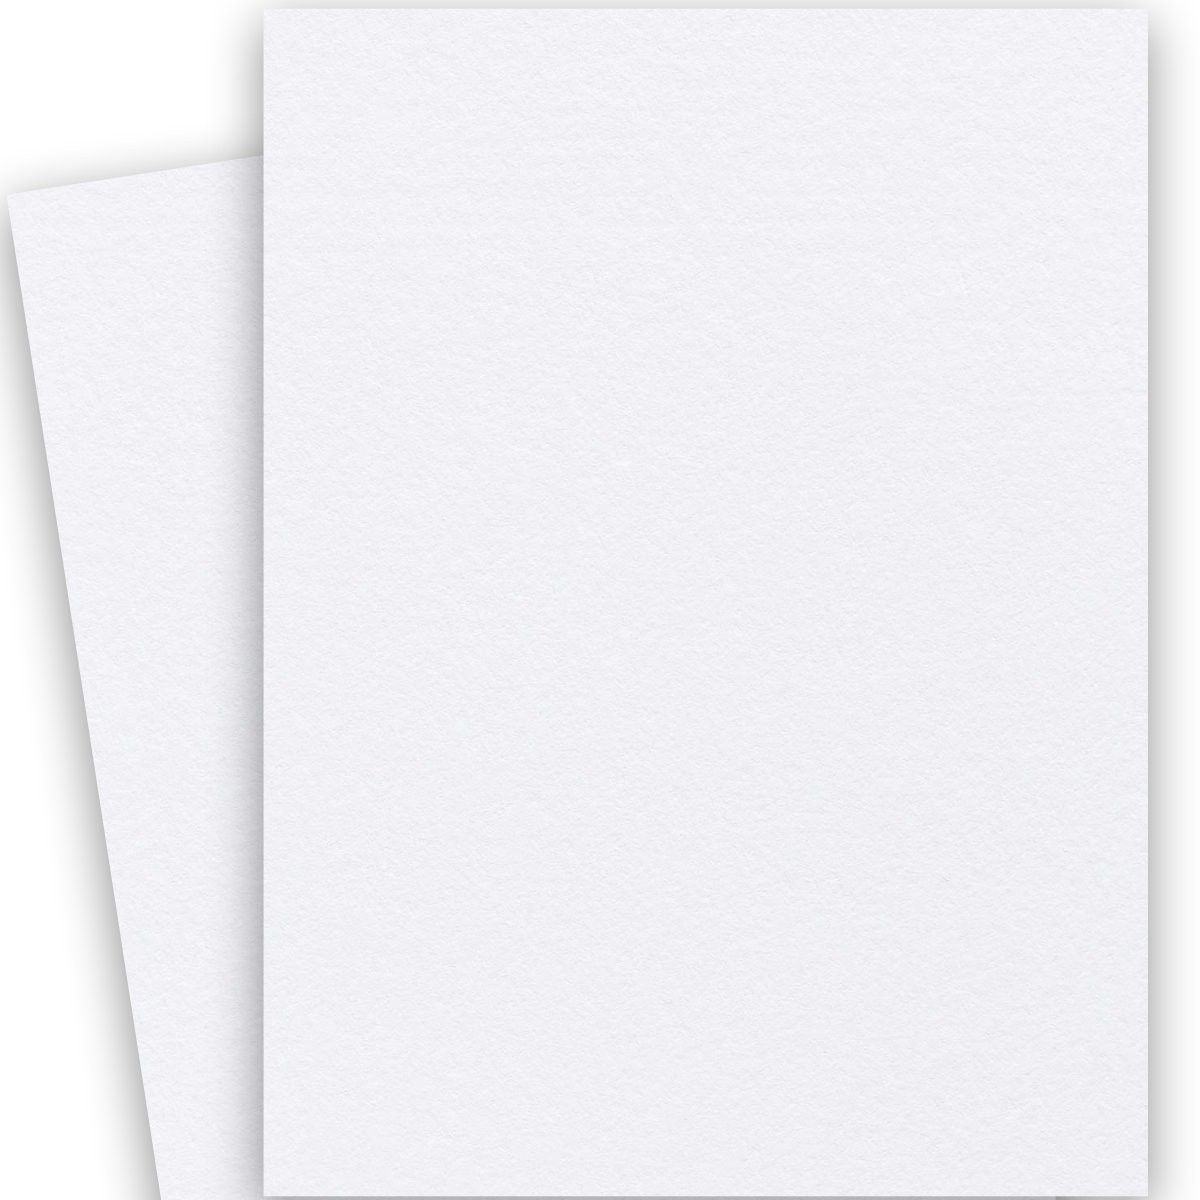 CRANE'S CREST Pearl White Card Stock - 8 1/2 x 11 in 110 lb Cover Smooth  100% Cotton 125 per Package